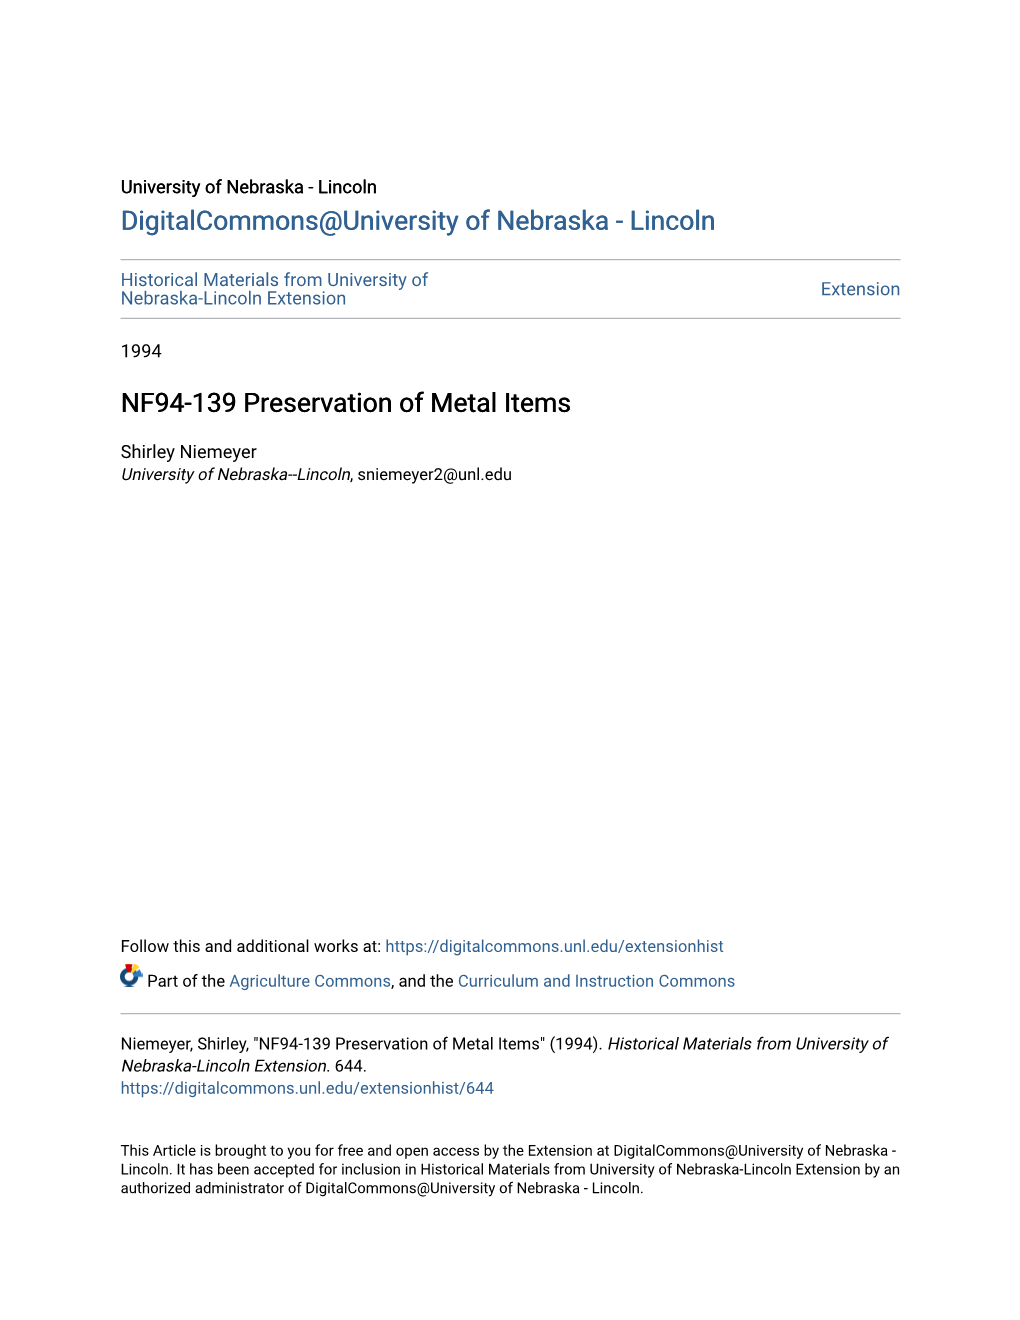 NF94-139 Preservation of Metal Items